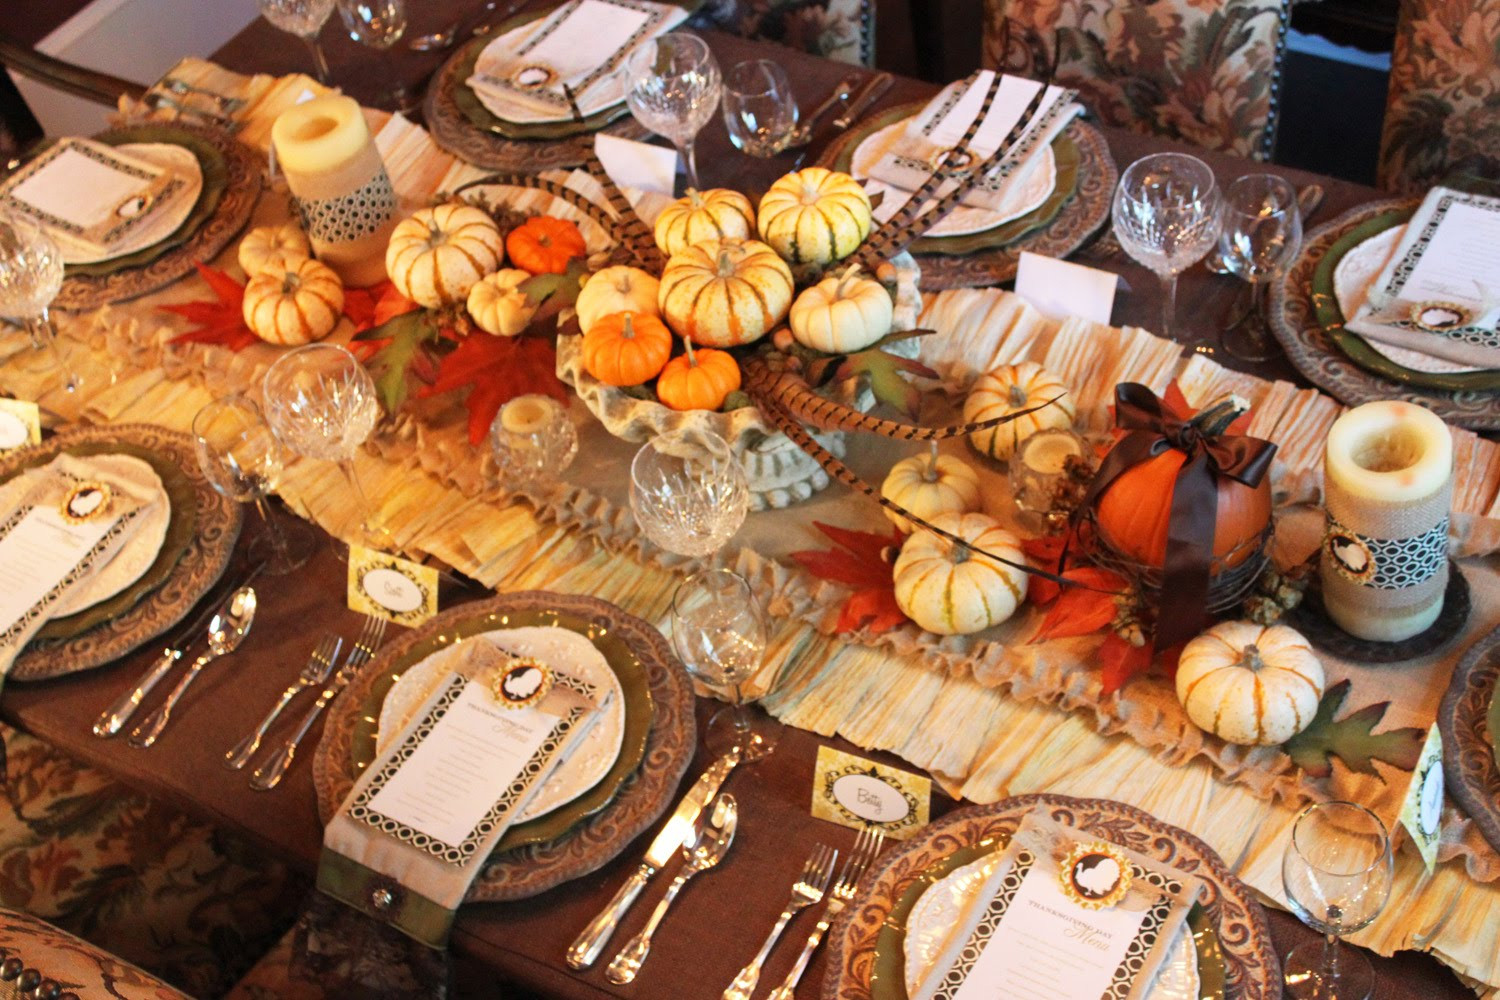 Thanksgiving Dinner Table Decorations
 A feast for the eyes Thanksgiving dinner table decorations